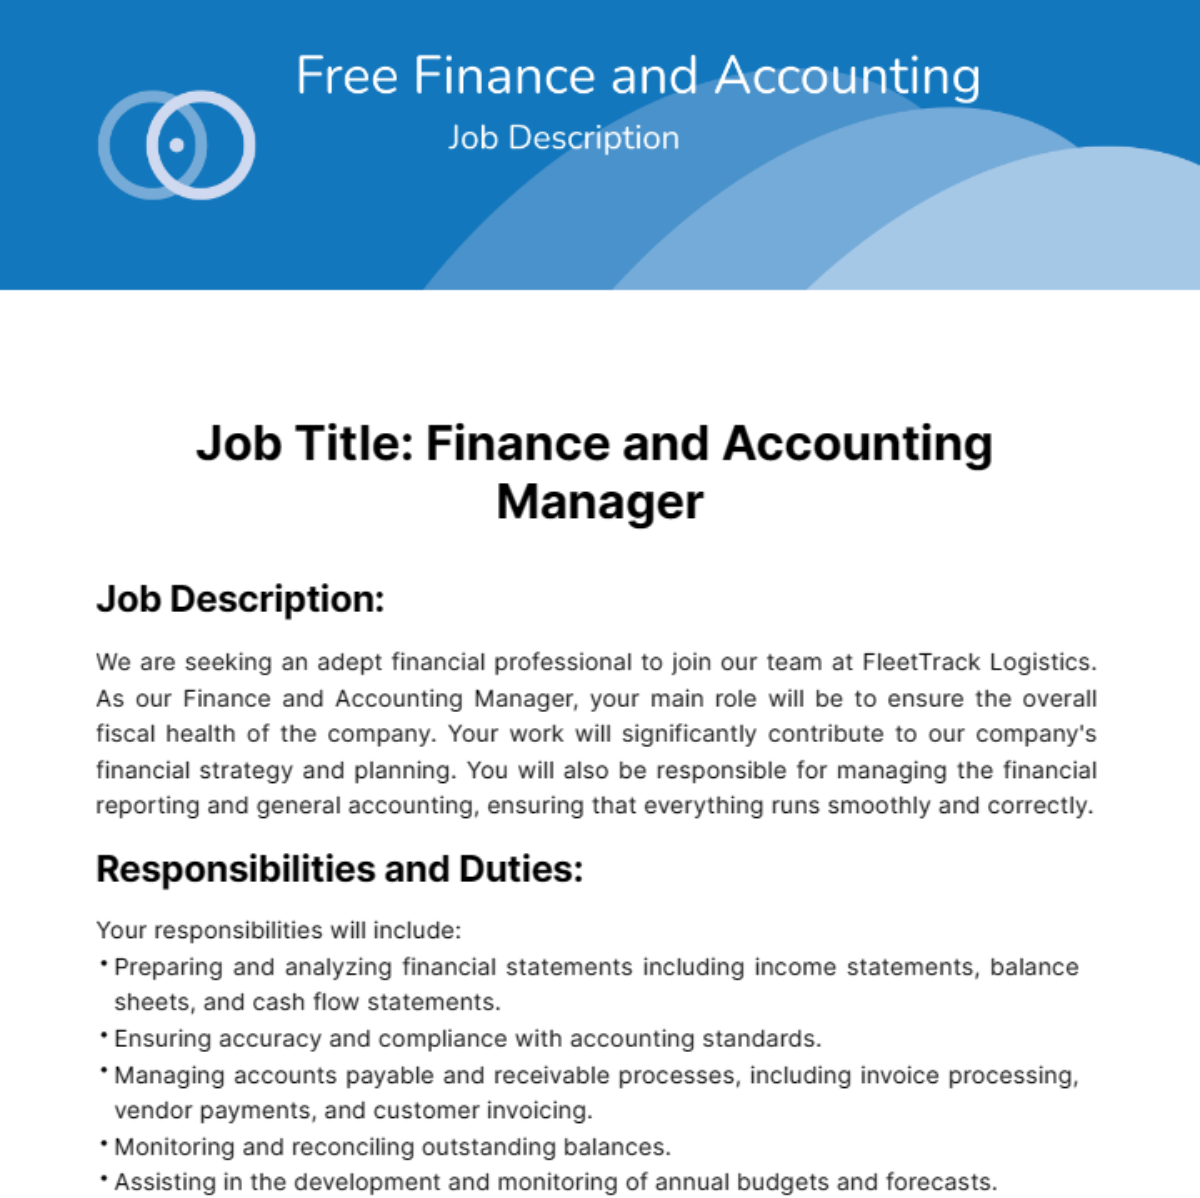 Finance and Accounting Job Description Template